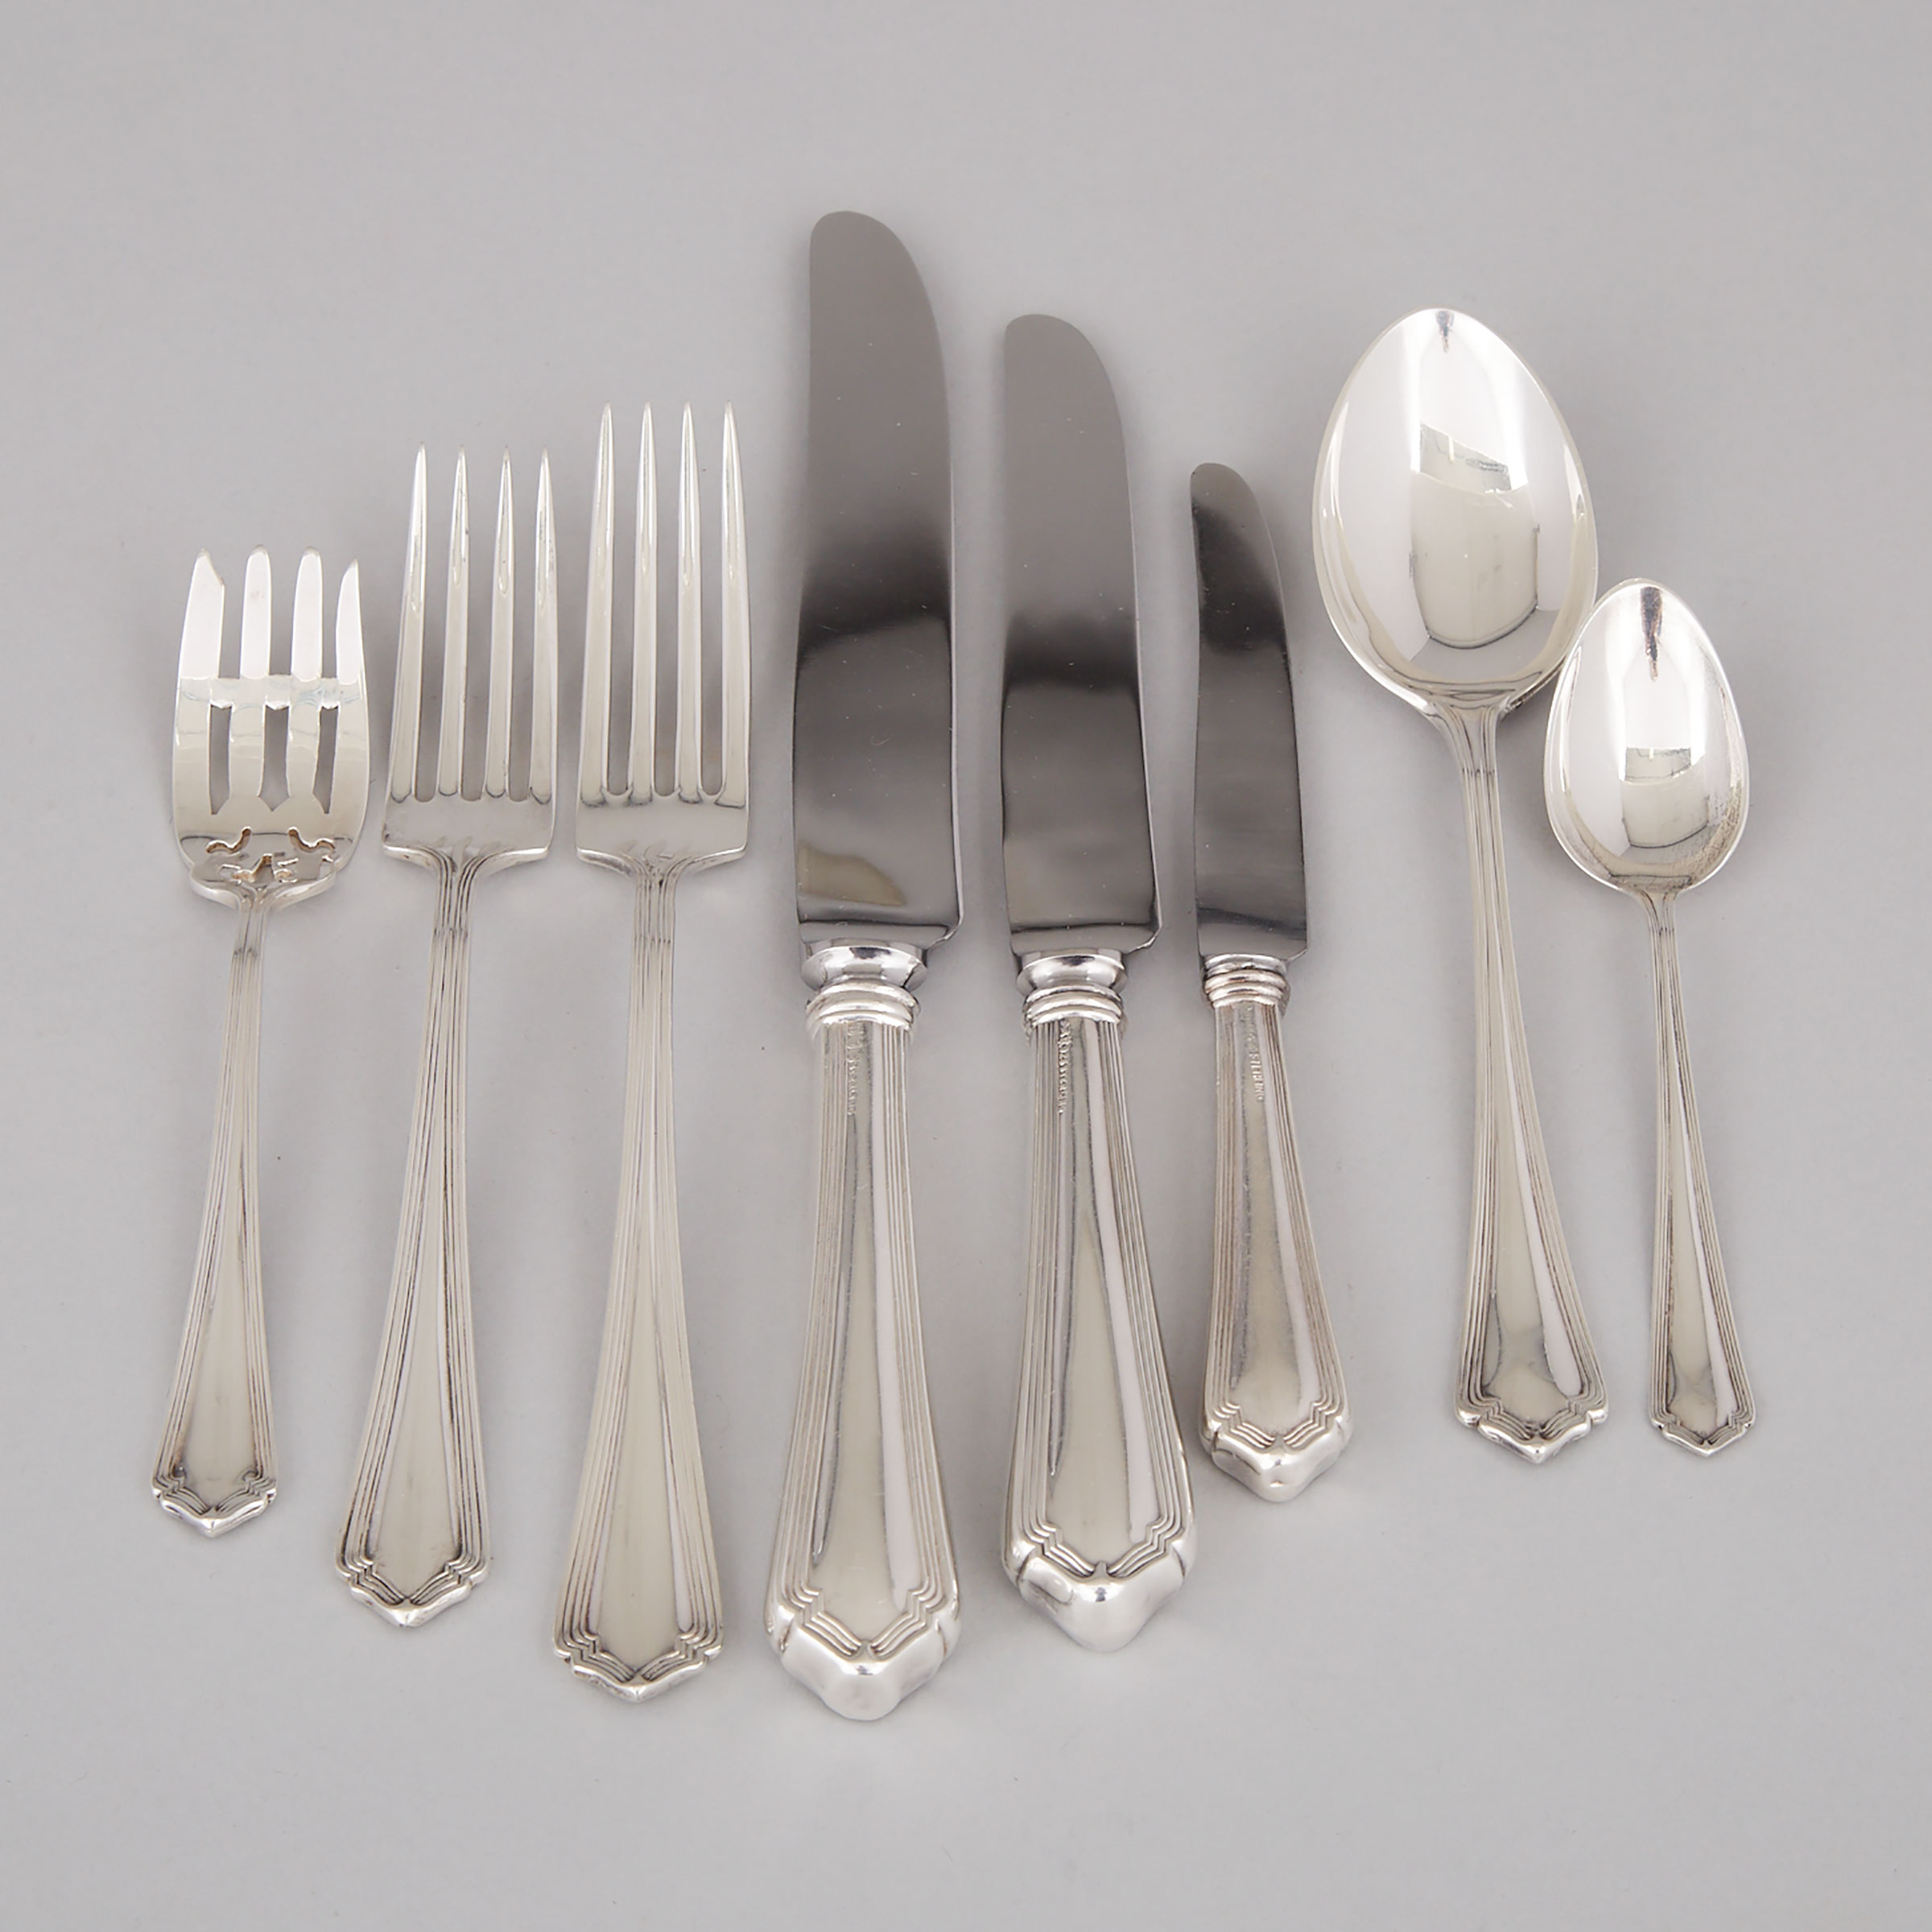 Canadian Silver Flatware Service, Roden Bros. and Ellis, Toronto, Ont., early 20th century